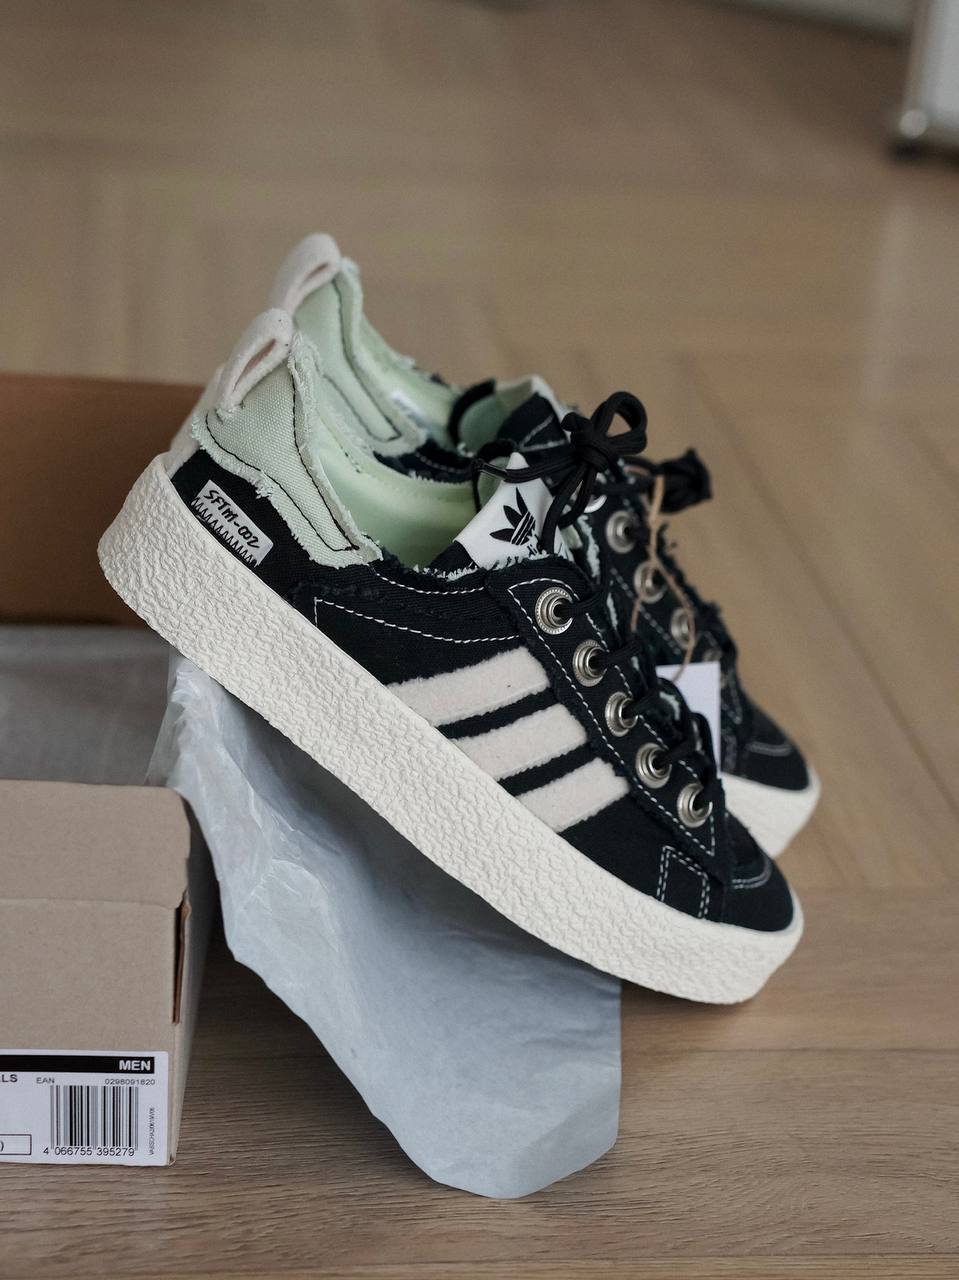 SONG FOR THE MUTE x Adidas originals Campus 80S